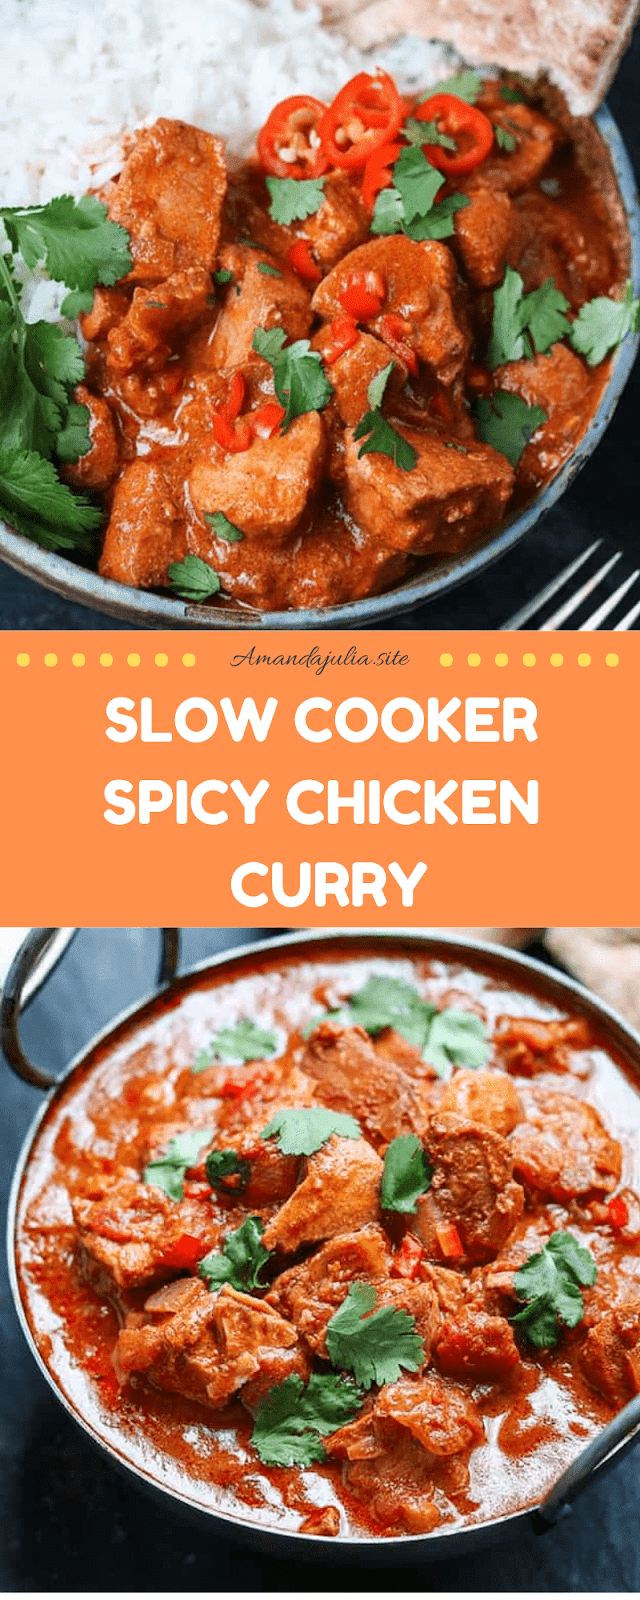 Slow Cooker Spicy Chicken Curry Recipe -   13 healthy recipes Chicken curry ideas